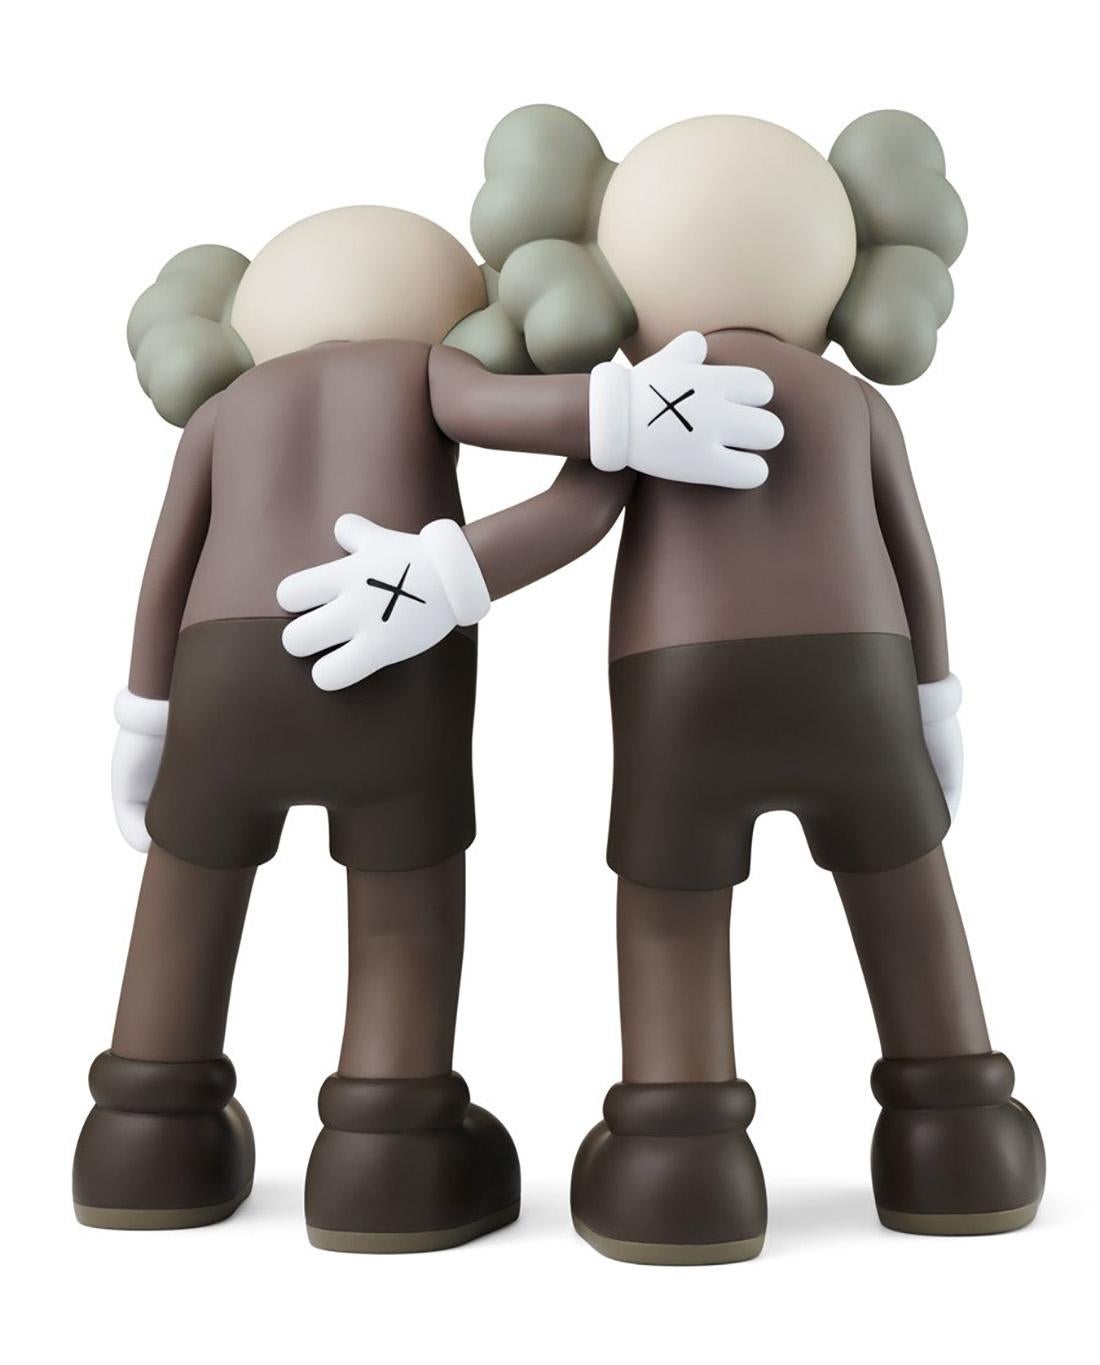 kaws holding hands